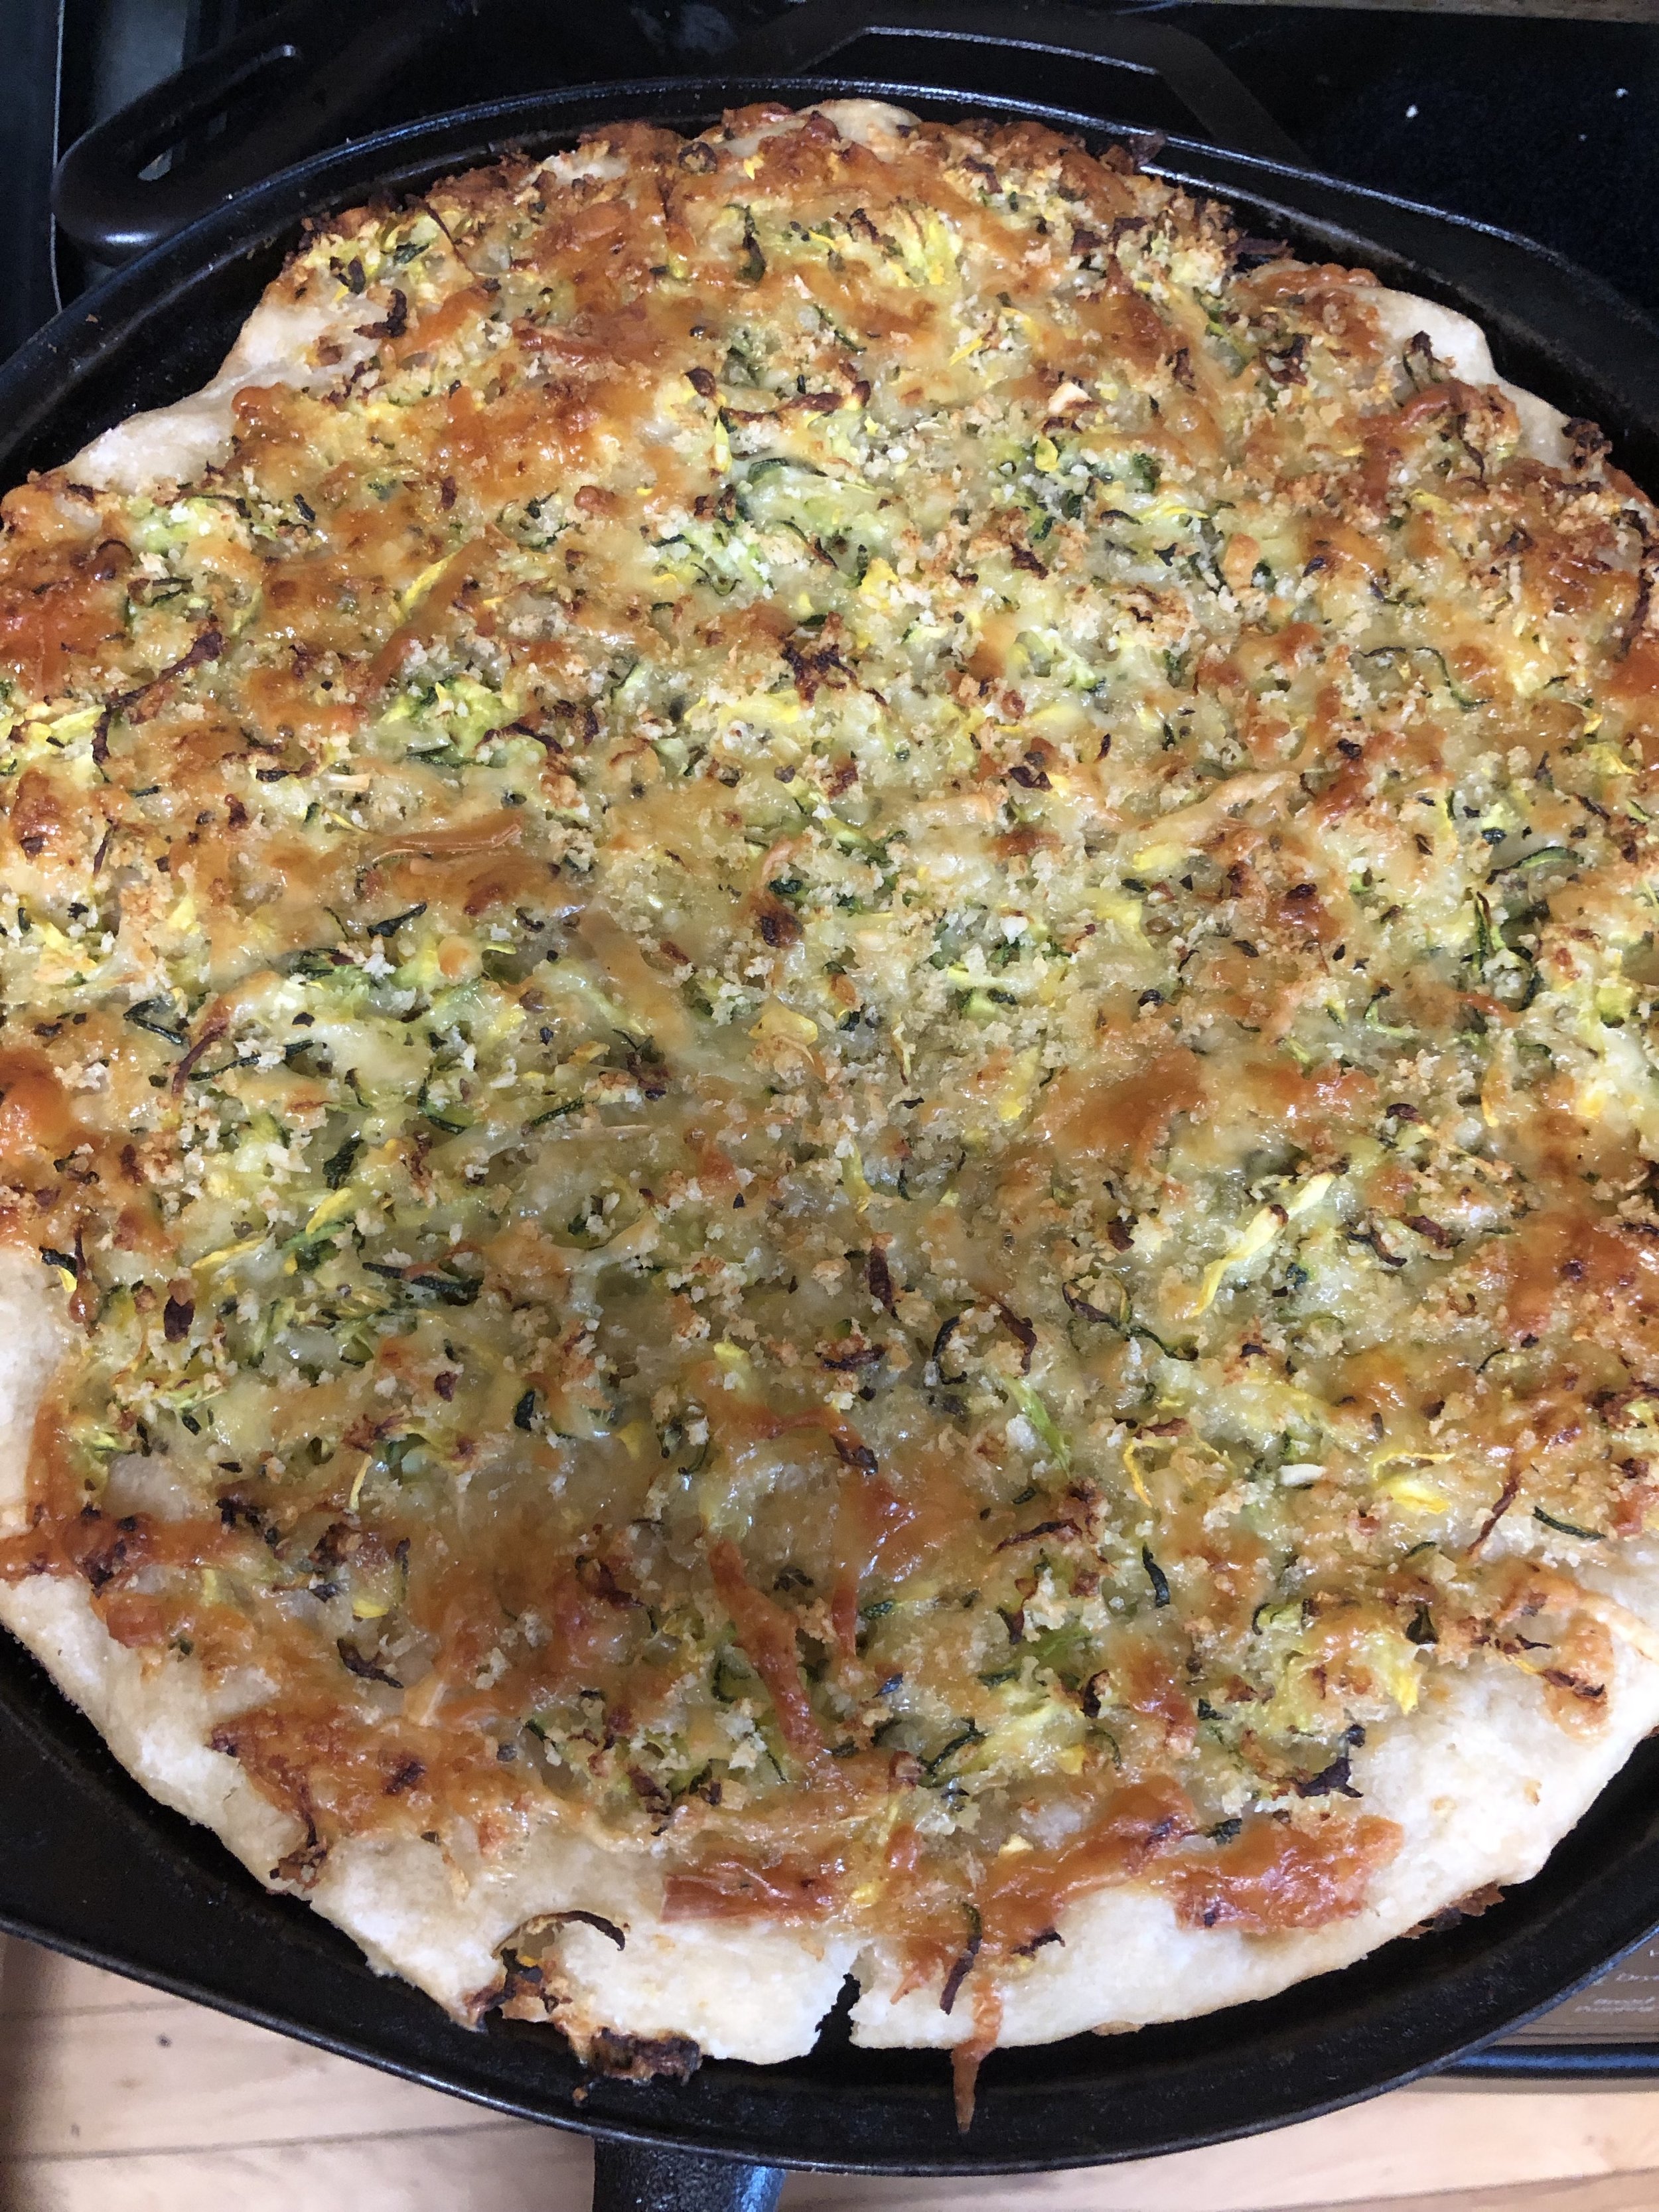  shredded zukes and summer squash cheese and breadcrumbs on pizza dough.  Very Yummy!  Recipe link in last weeks blog 